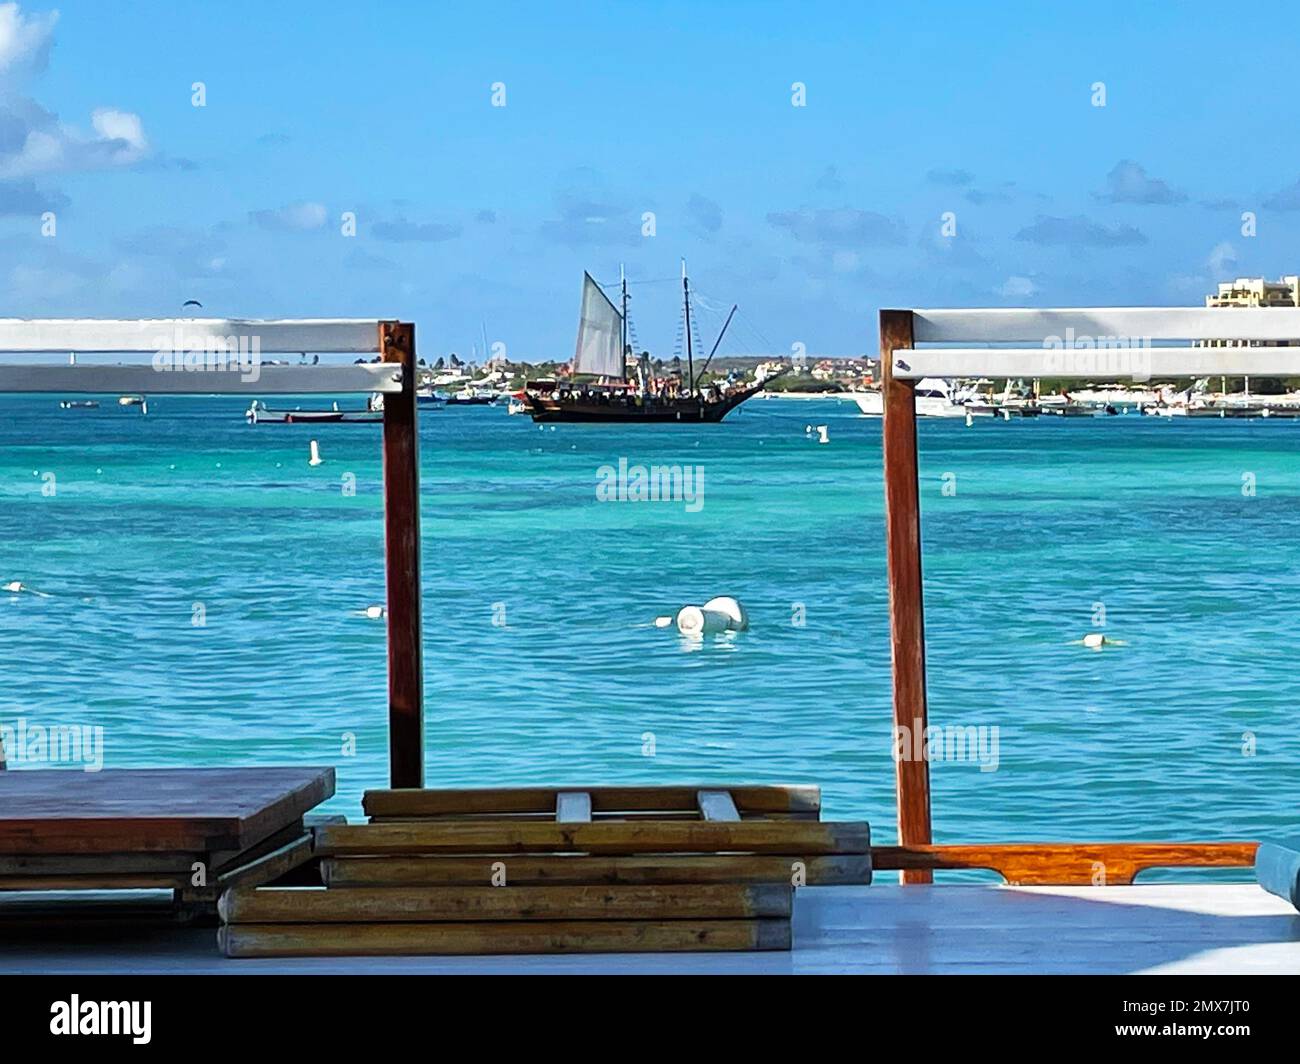 A sailboat framed between the posts of a gangway opening on a pier, Palm Beach, Aruba. Stock Photo